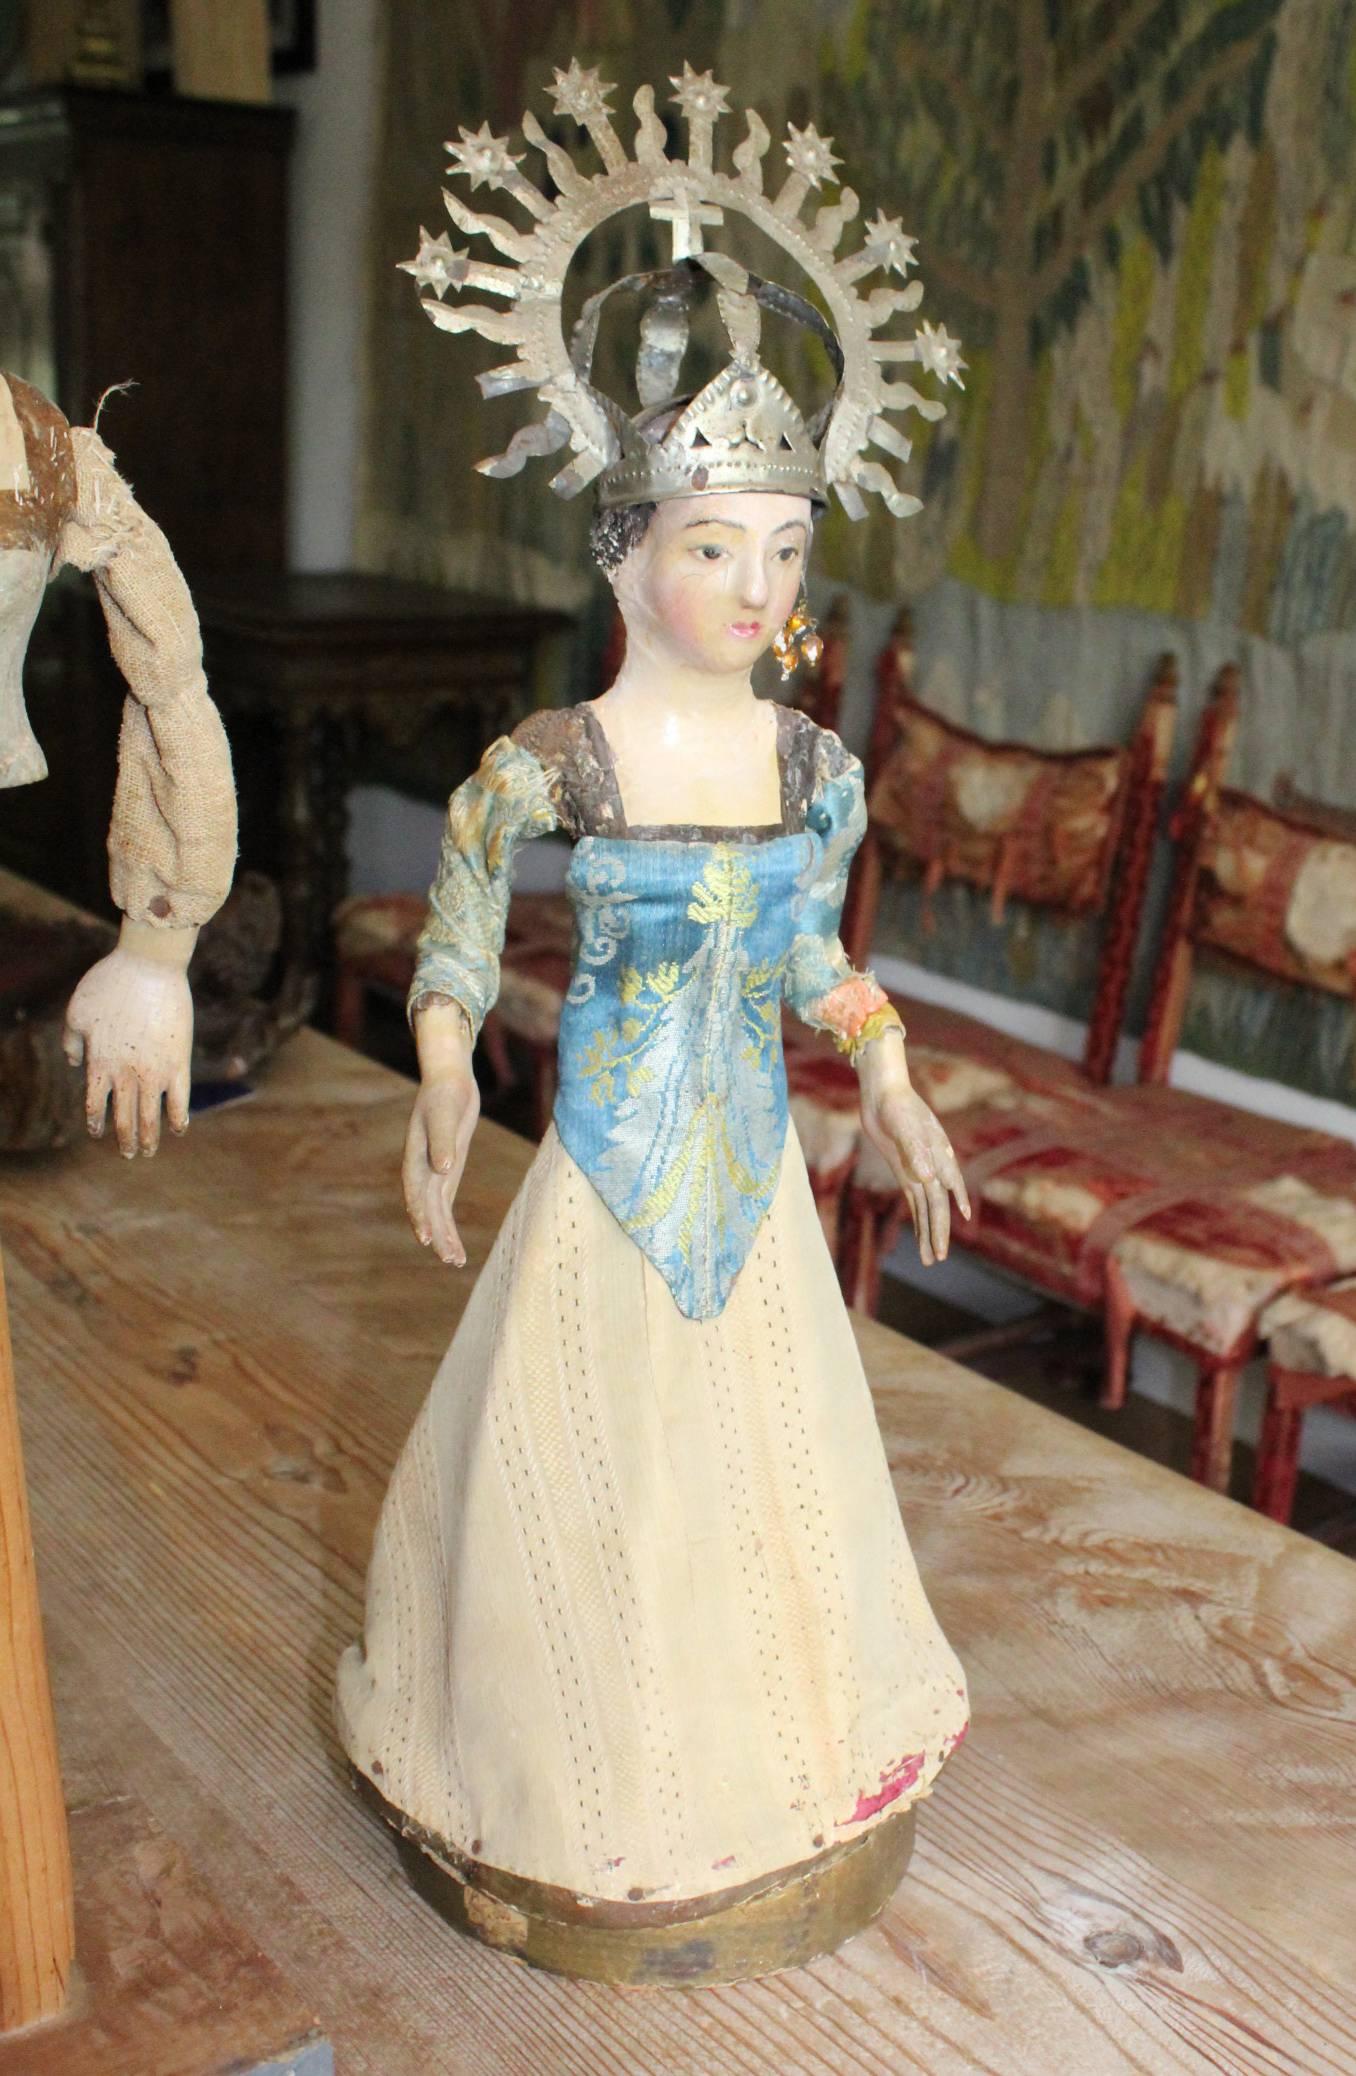 19th century Spanish wooden polychrome sculpture of the Virgin Mary with original clothing and tin crown.
 